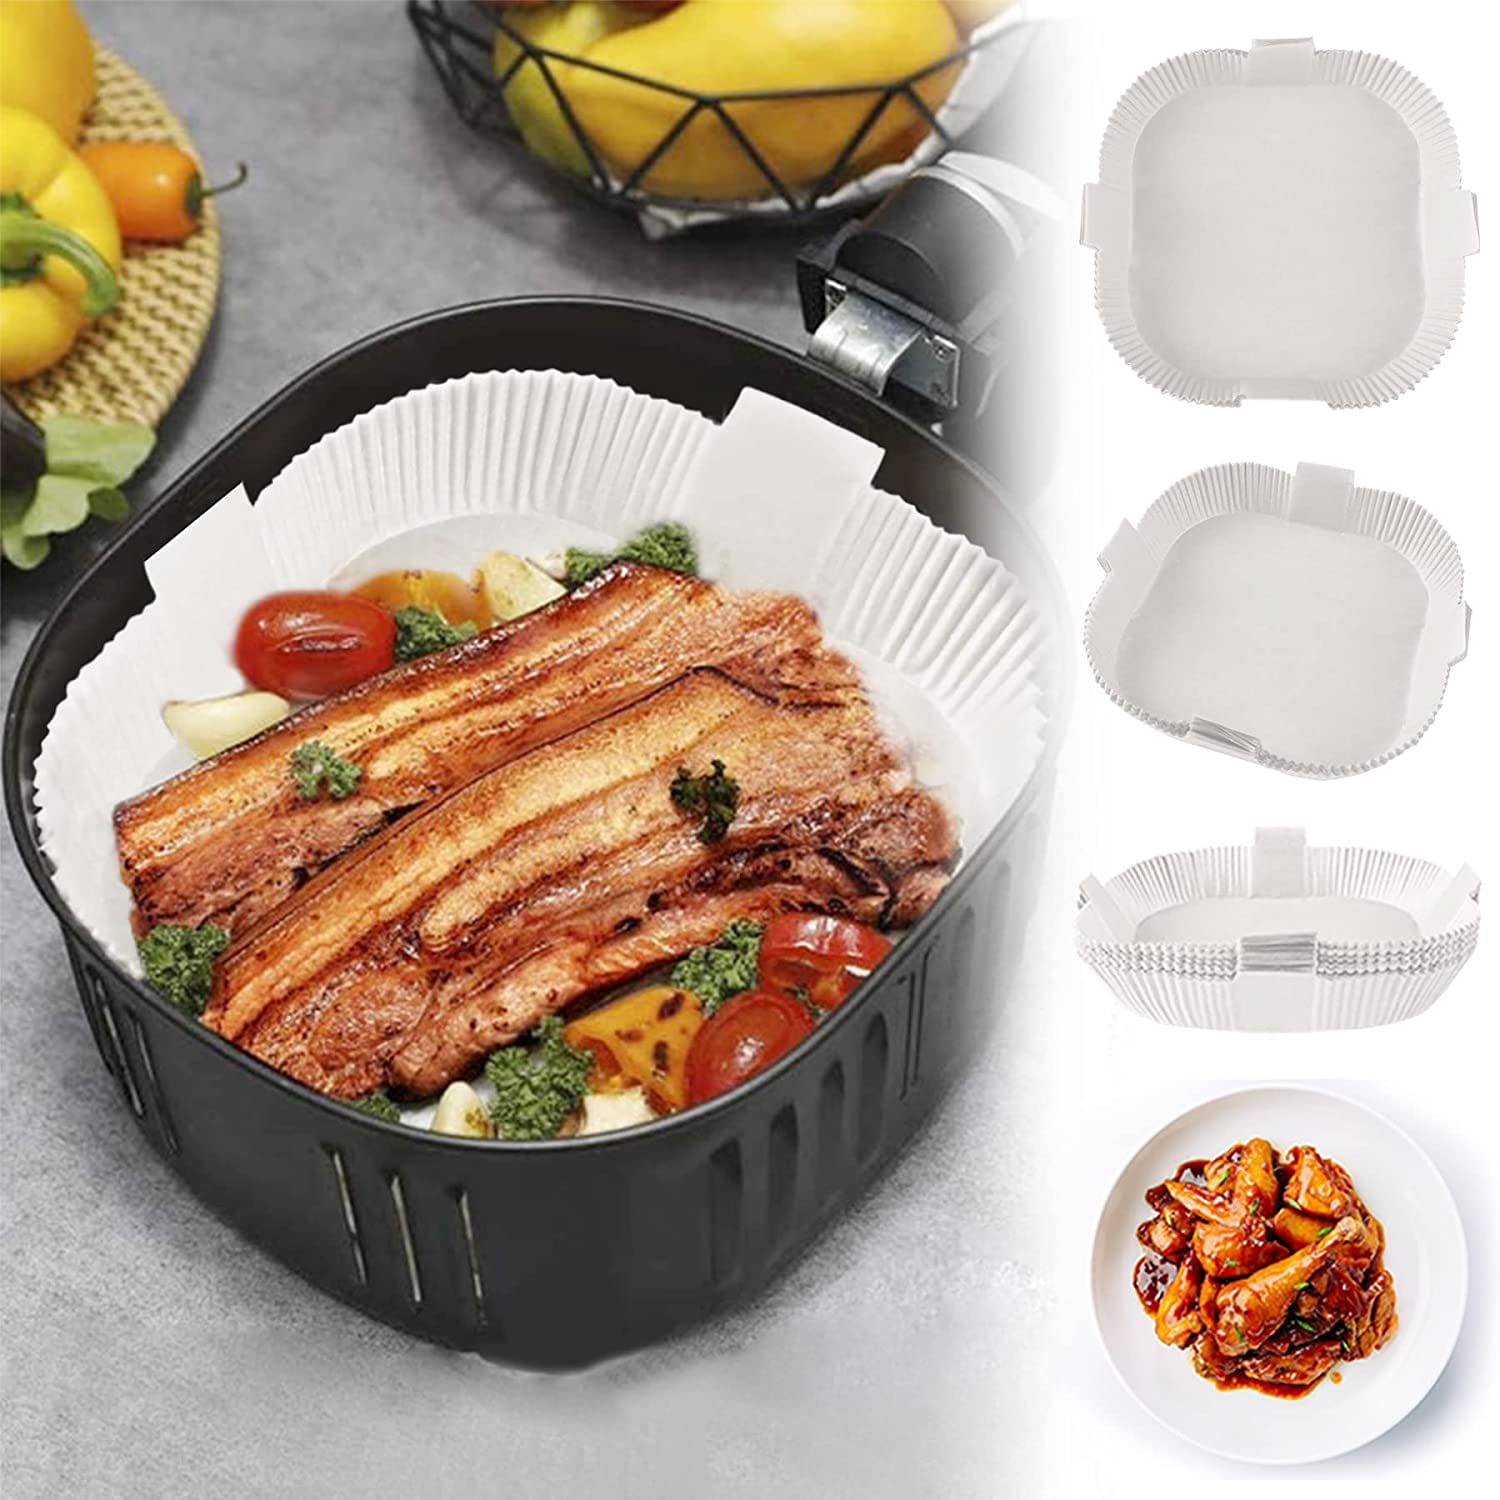  UHOUSE 120PCS Square Air Fryer Disposable Paper Liner, 7.9 inch  Non-stick Air Fryer Disposable Liners, Food Grade Parchment,Baking Paper  for Air Fryer And Baking Roasting Microwave,mothers day gifts…: Home &  Kitchen